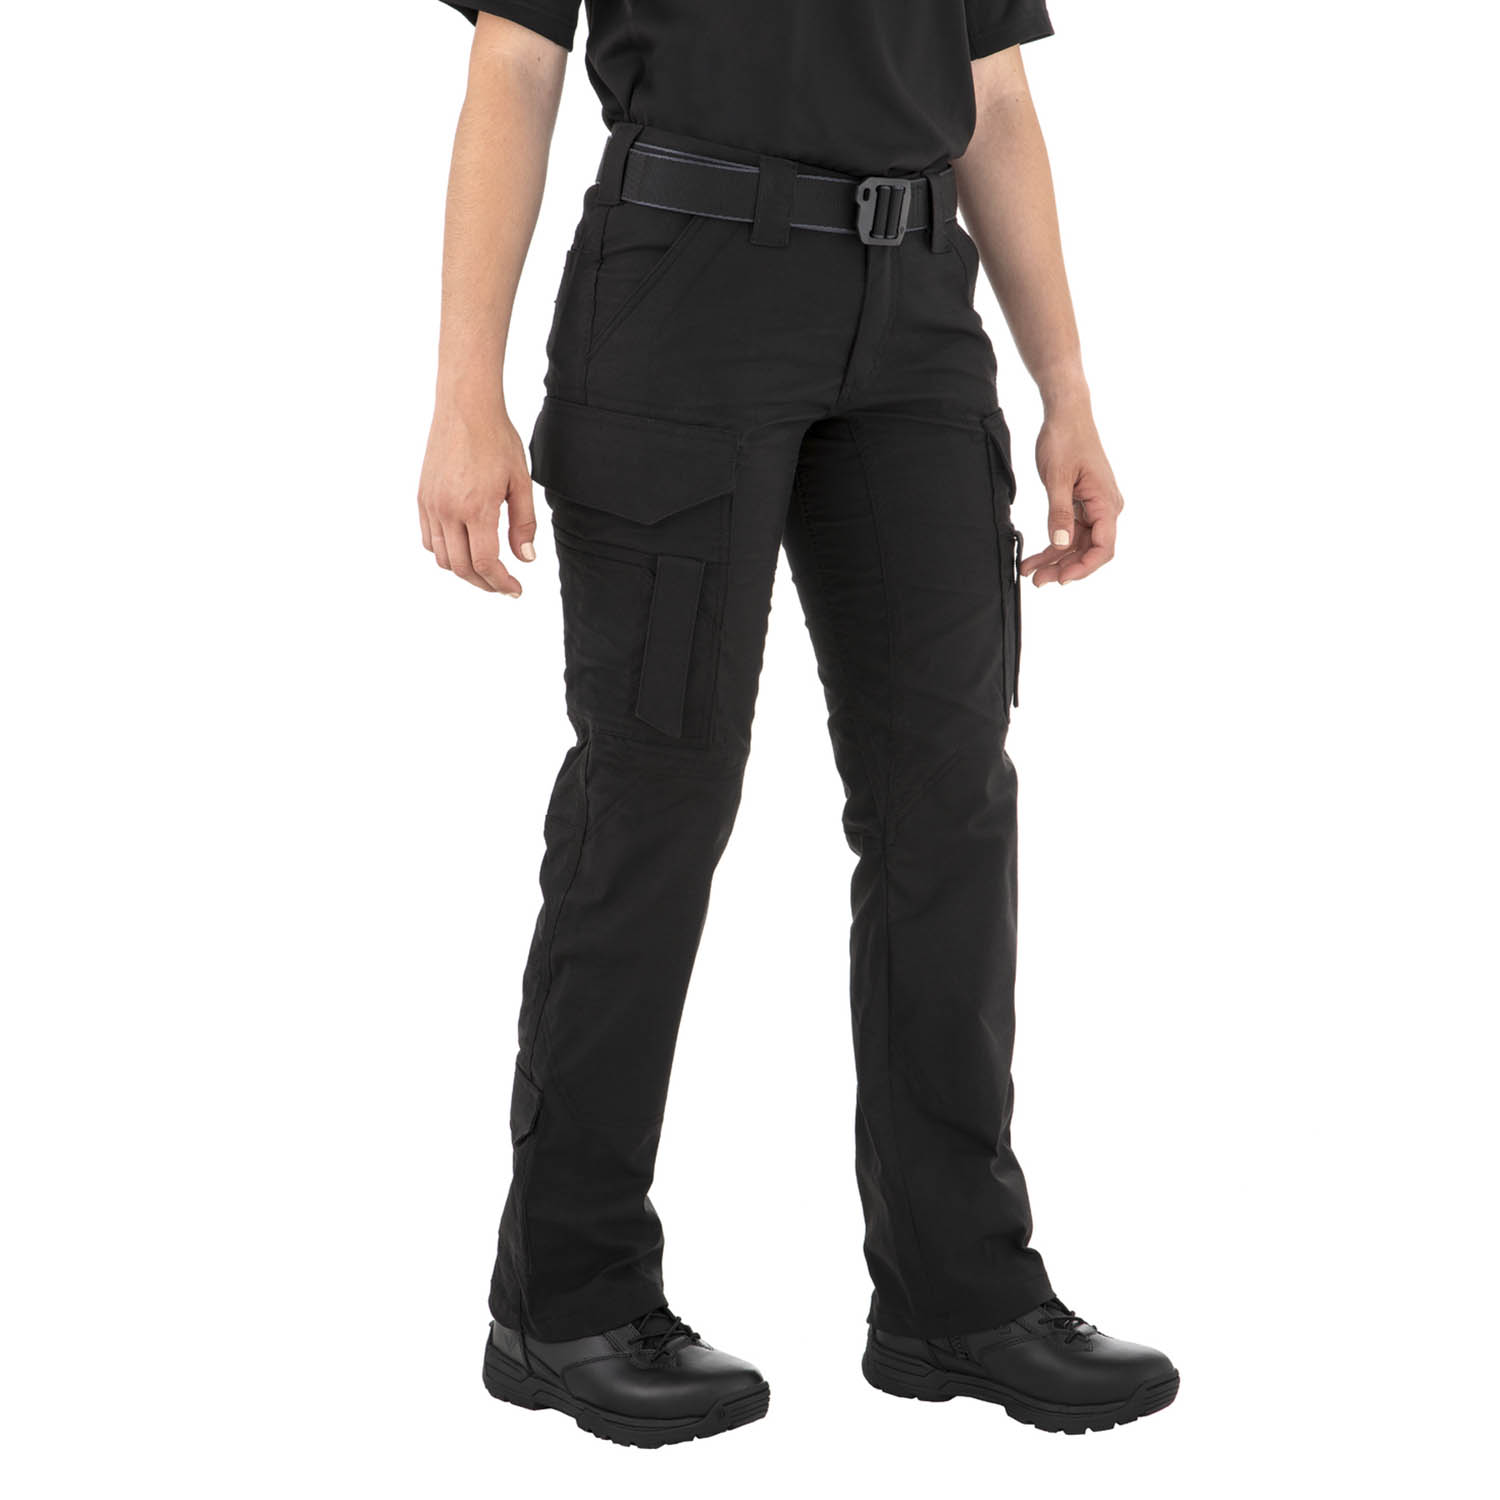 FIRST TACTICAL WOMEN'S V2 EMS PANTS